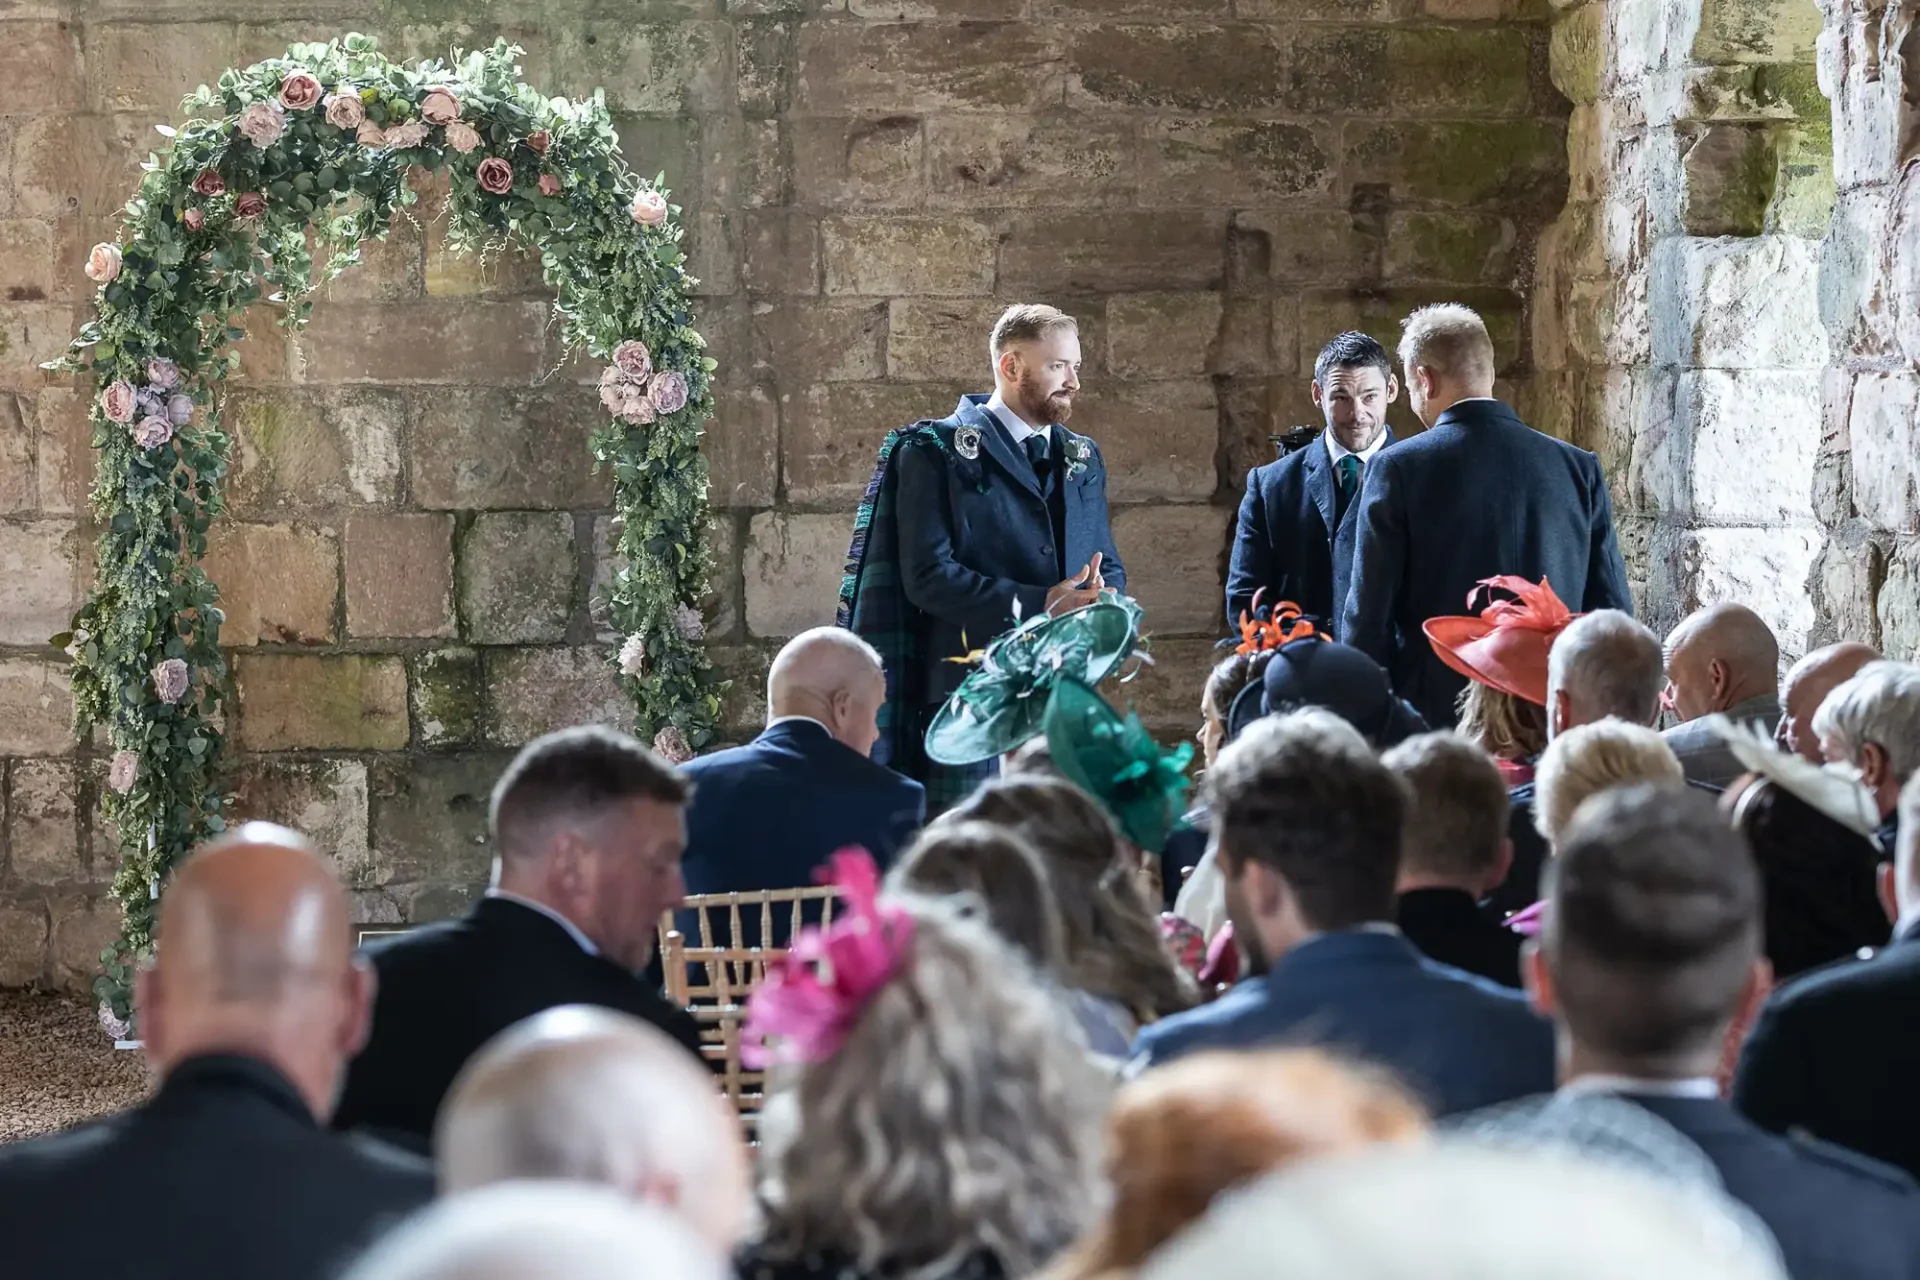 A wedding ceremony in a rustic building with stone walls, featuring guests in formal attire and a floral arch at the front.